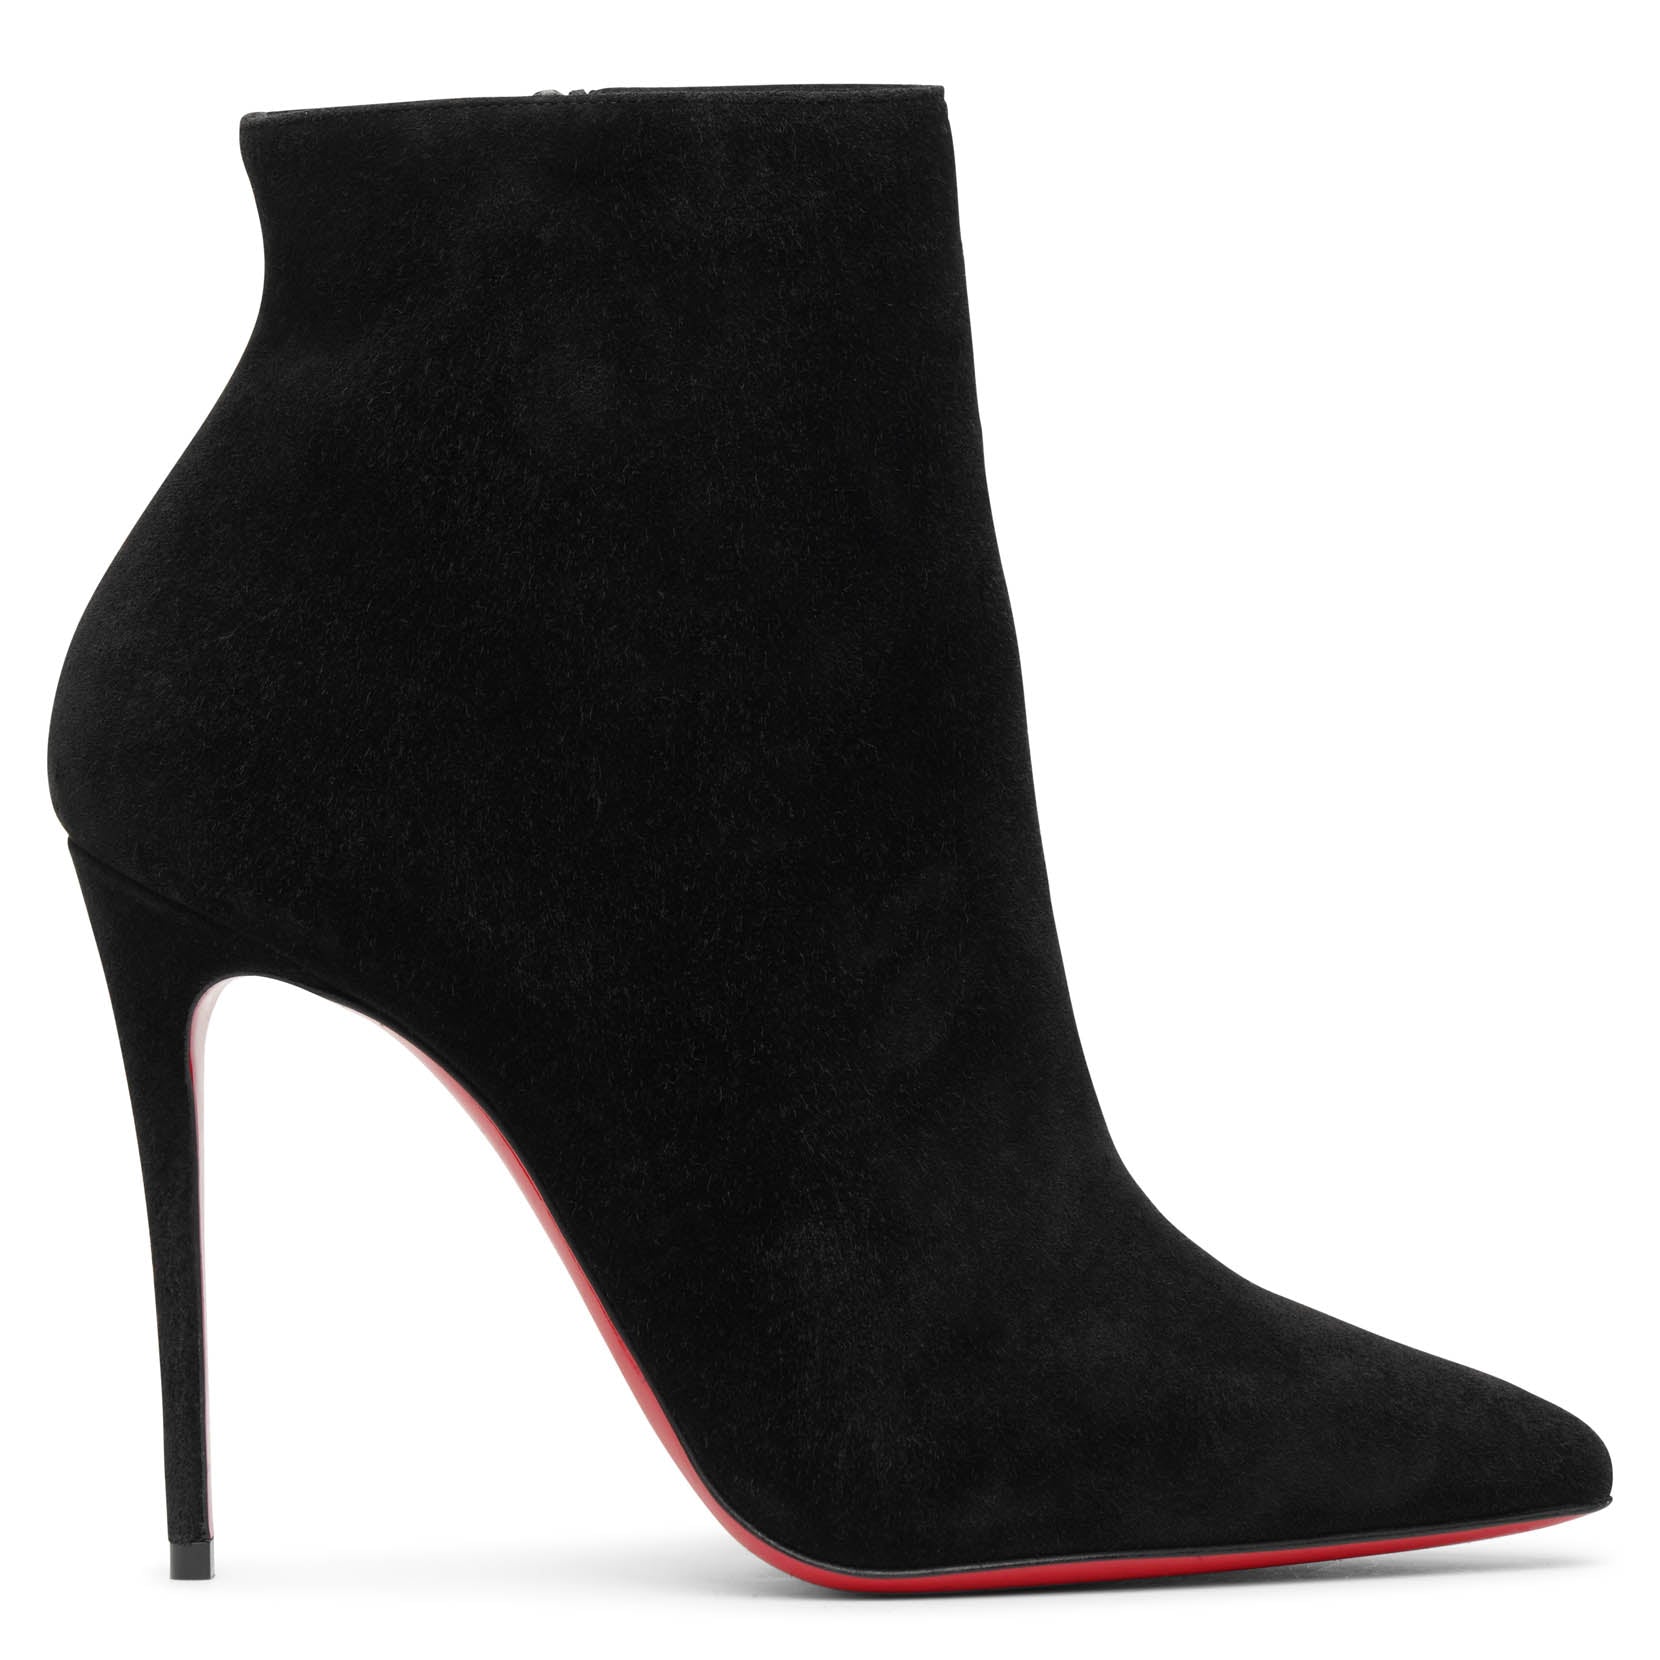 CHRISTIAN LOUBOUTIN SO KATE 100 BLACK SUEDE ANKLE BOOTS